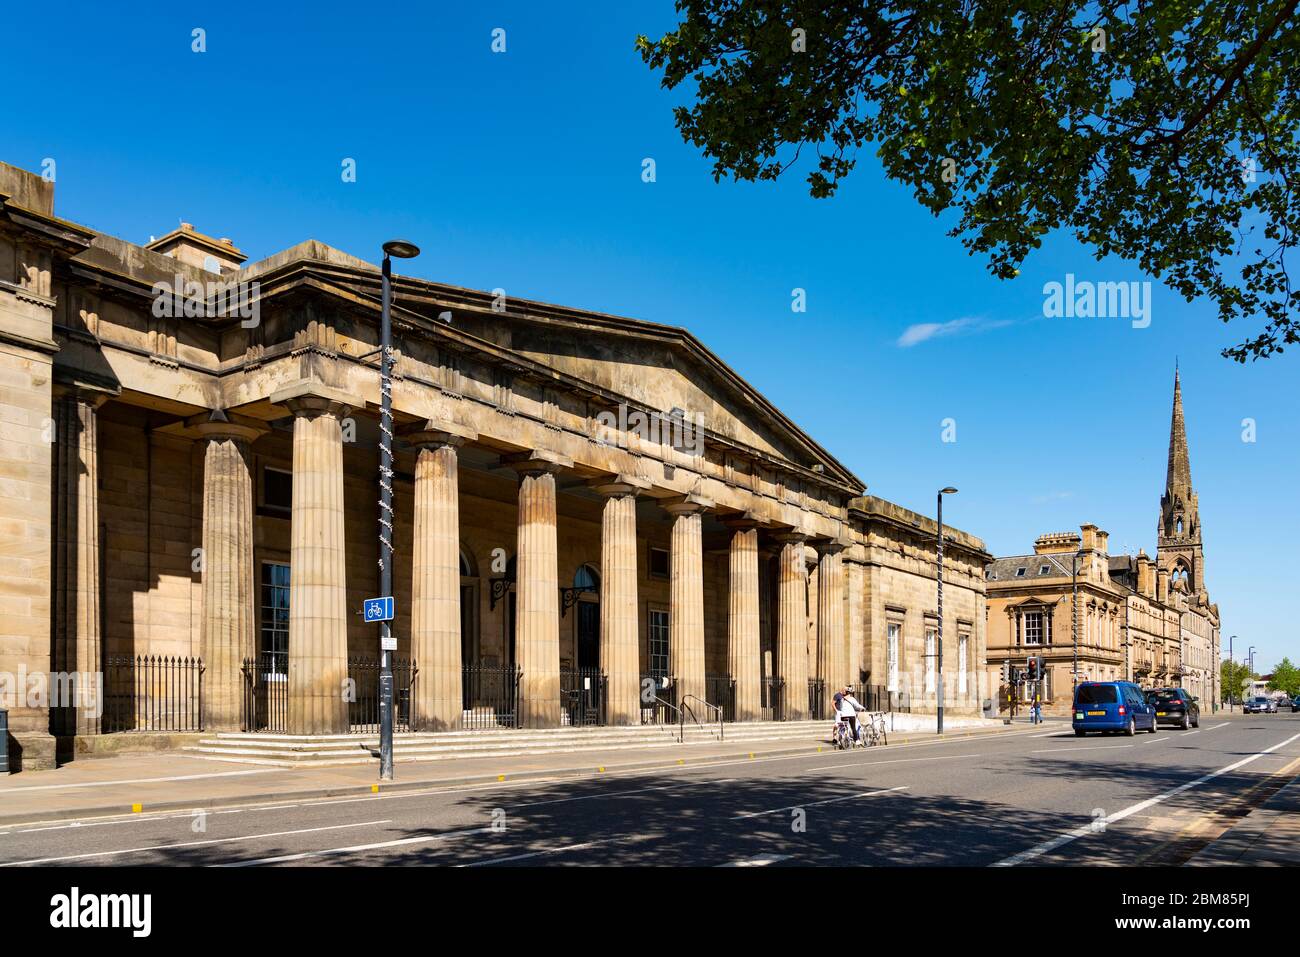 Exterior of Perth Sheriff Court House, closed during Covid-19 lockdown, Scotland, UK Stock Photo